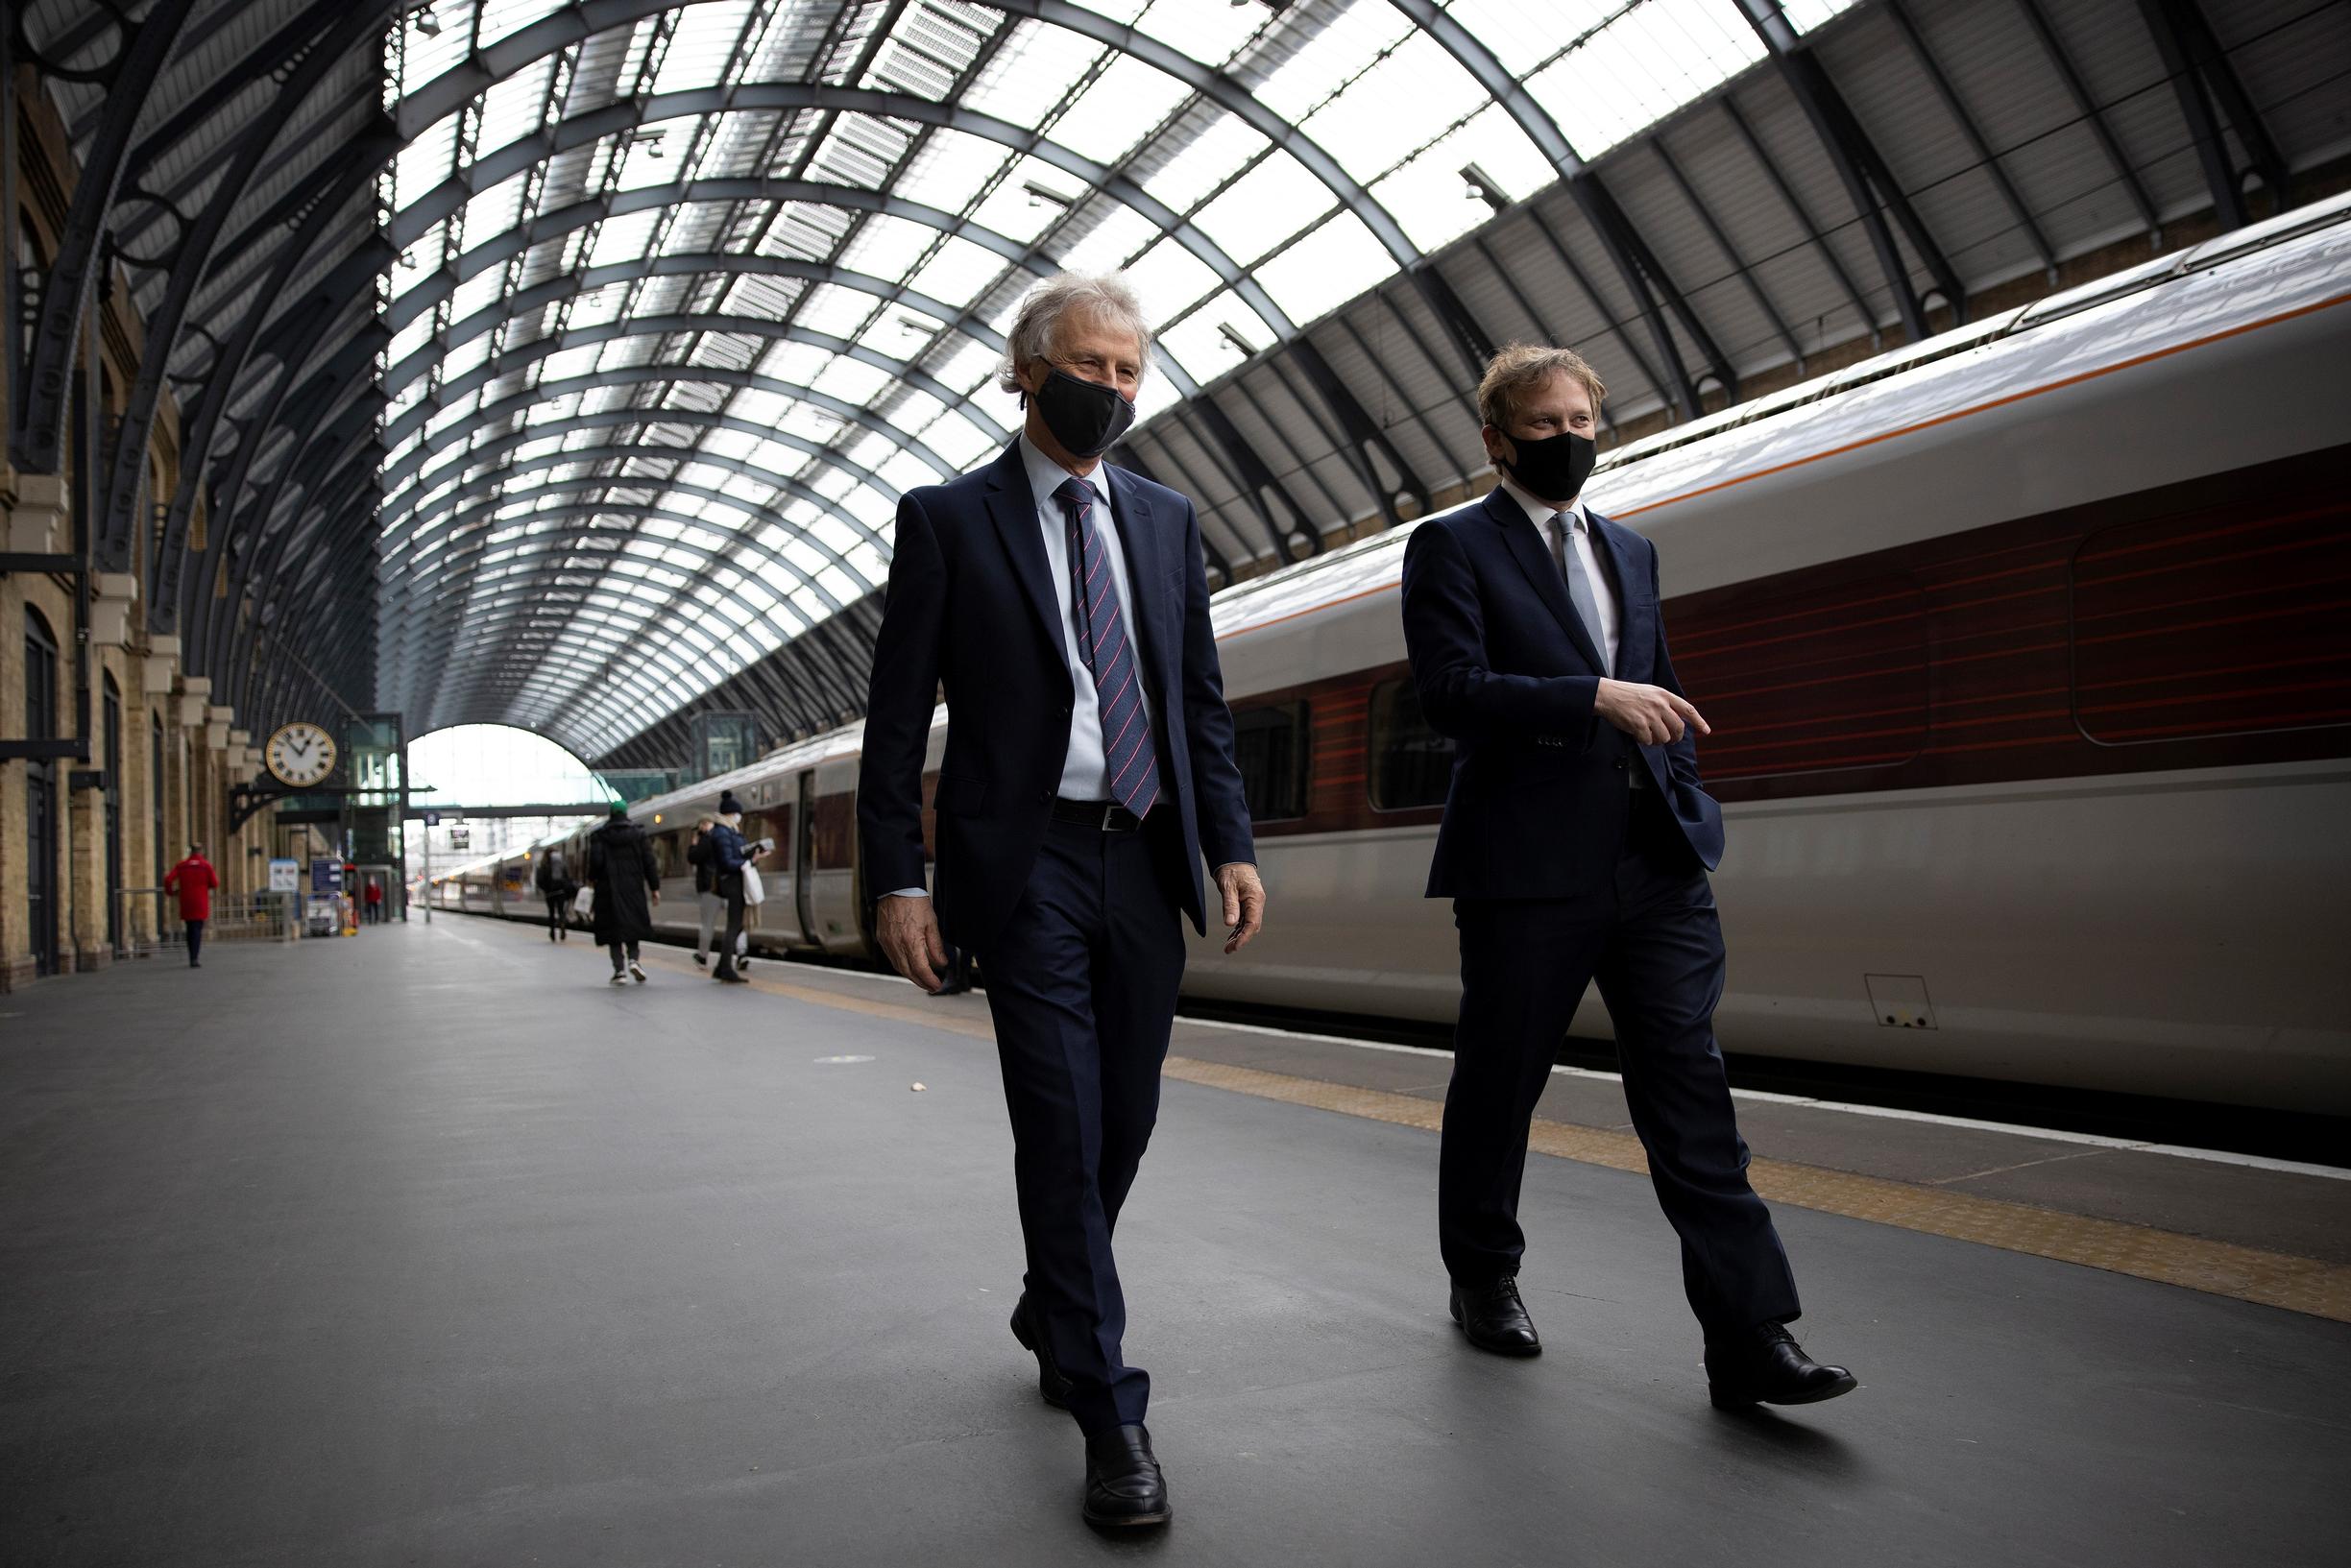 The case for Great British Railways is set out in a white paper produced by businessman Keith Williams (left) and transport secretary Grant Shapps